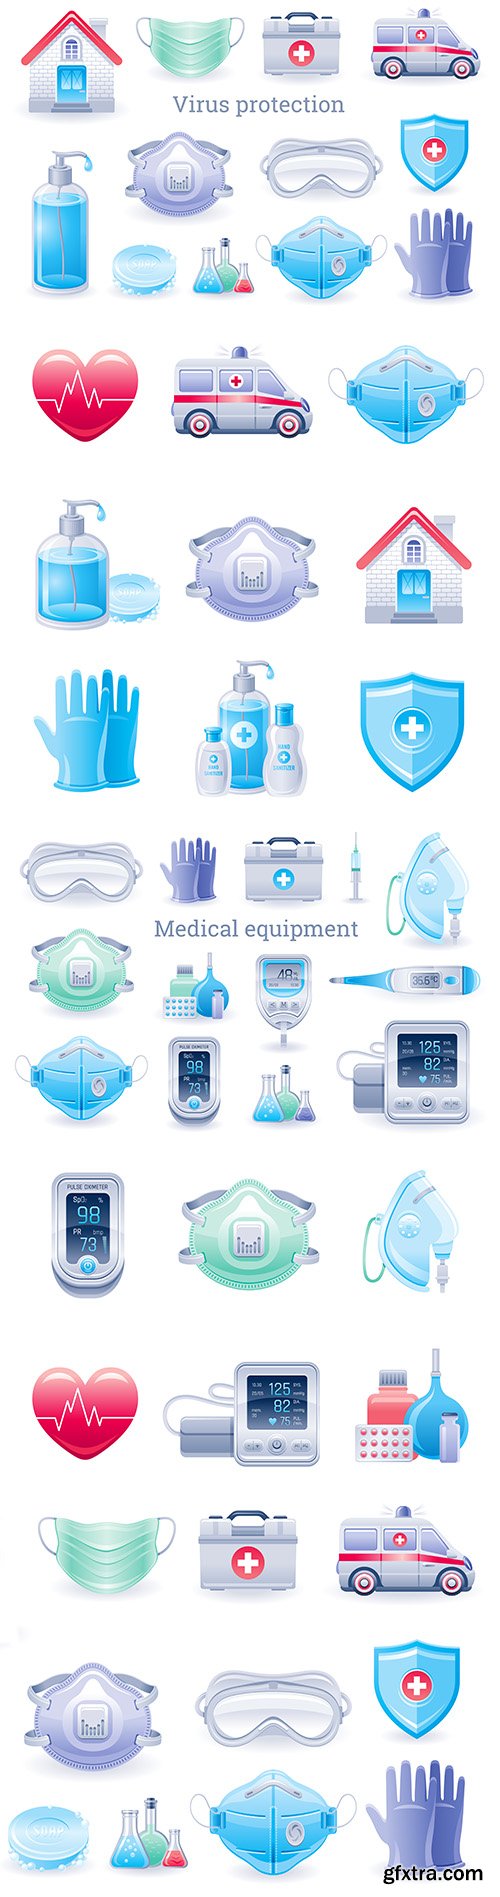 Virus protection and prevention kit medical equipment